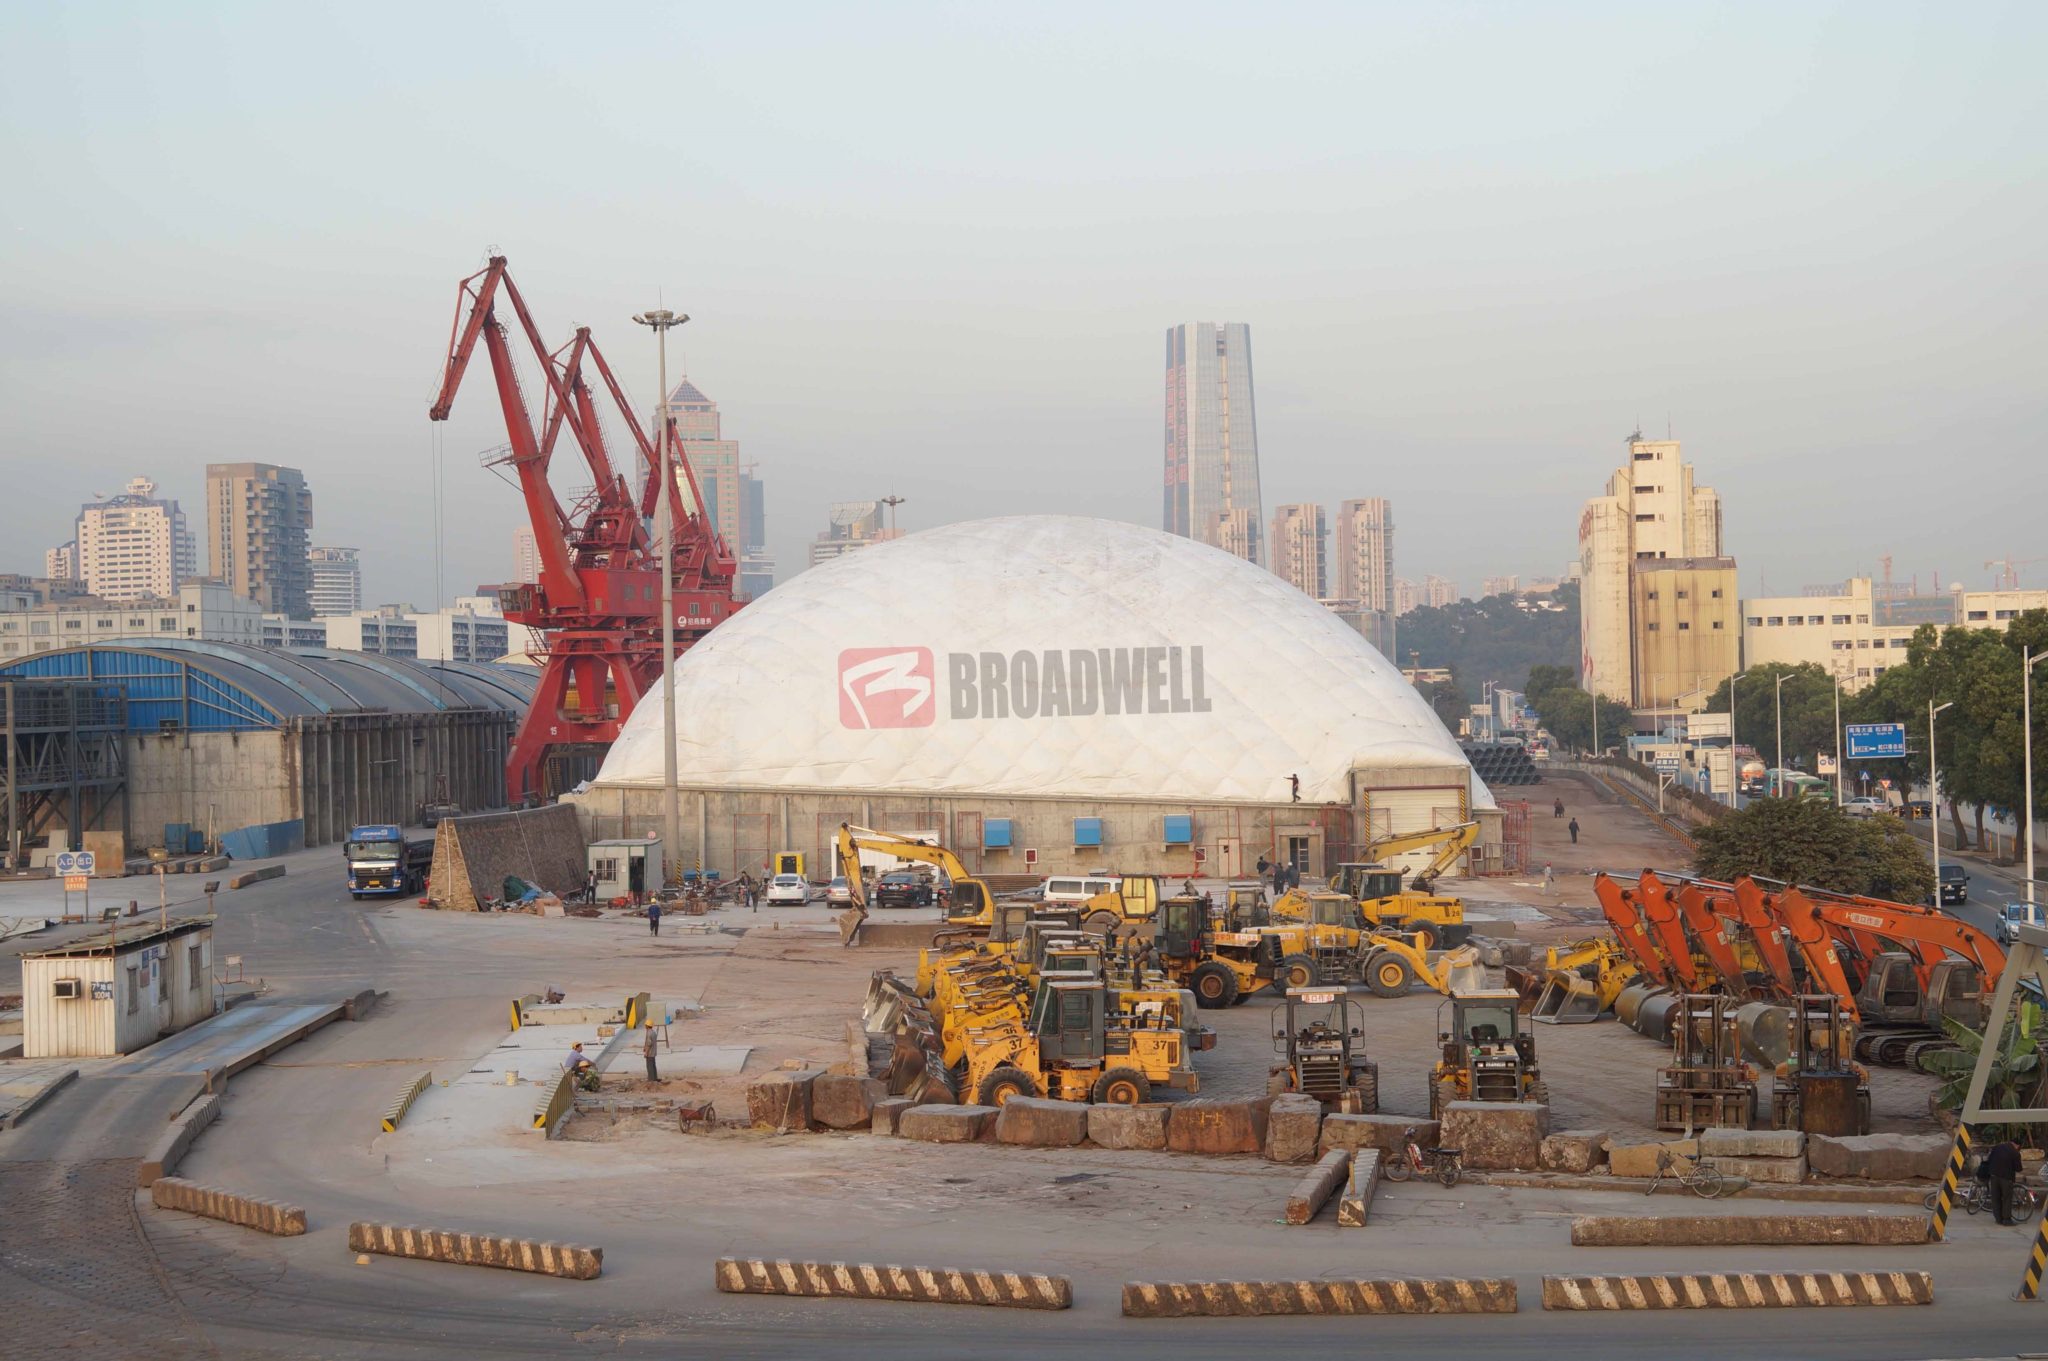 Broadwell Air Domes – Global Leader in Air Domes